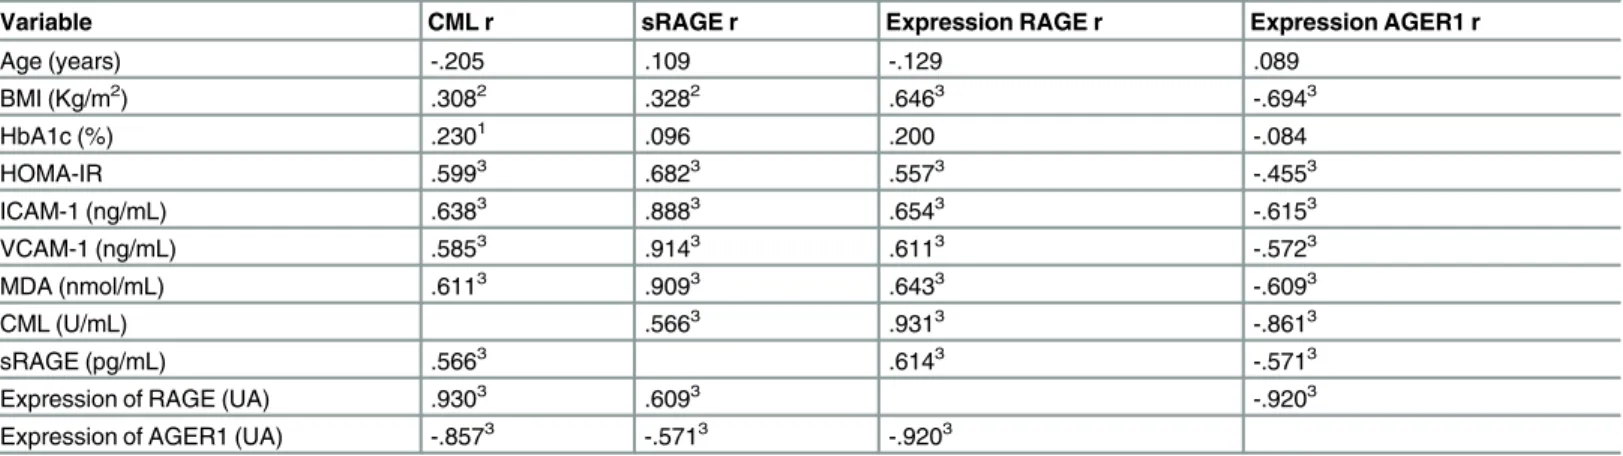 Table 2. Relationships among CML, sRAGE, Expression RAGE and AGER1, insulin resistance, oxidative stress and endothelial damage.